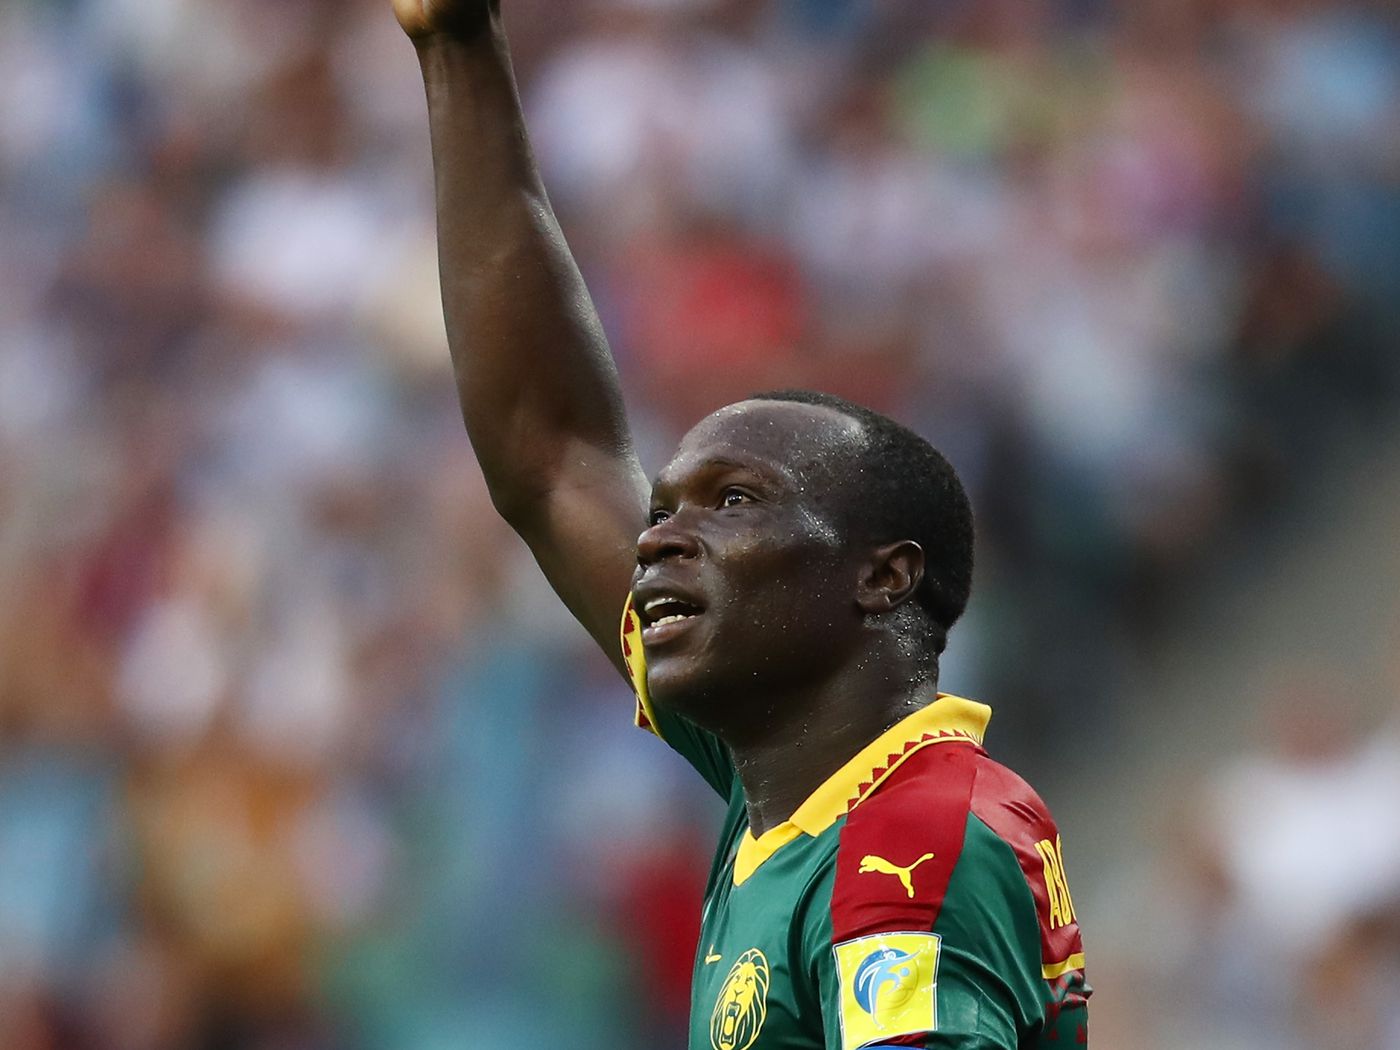 Could West Ham be interested in Porto's wantaway striker Vincent Aboubakar? The Hammer